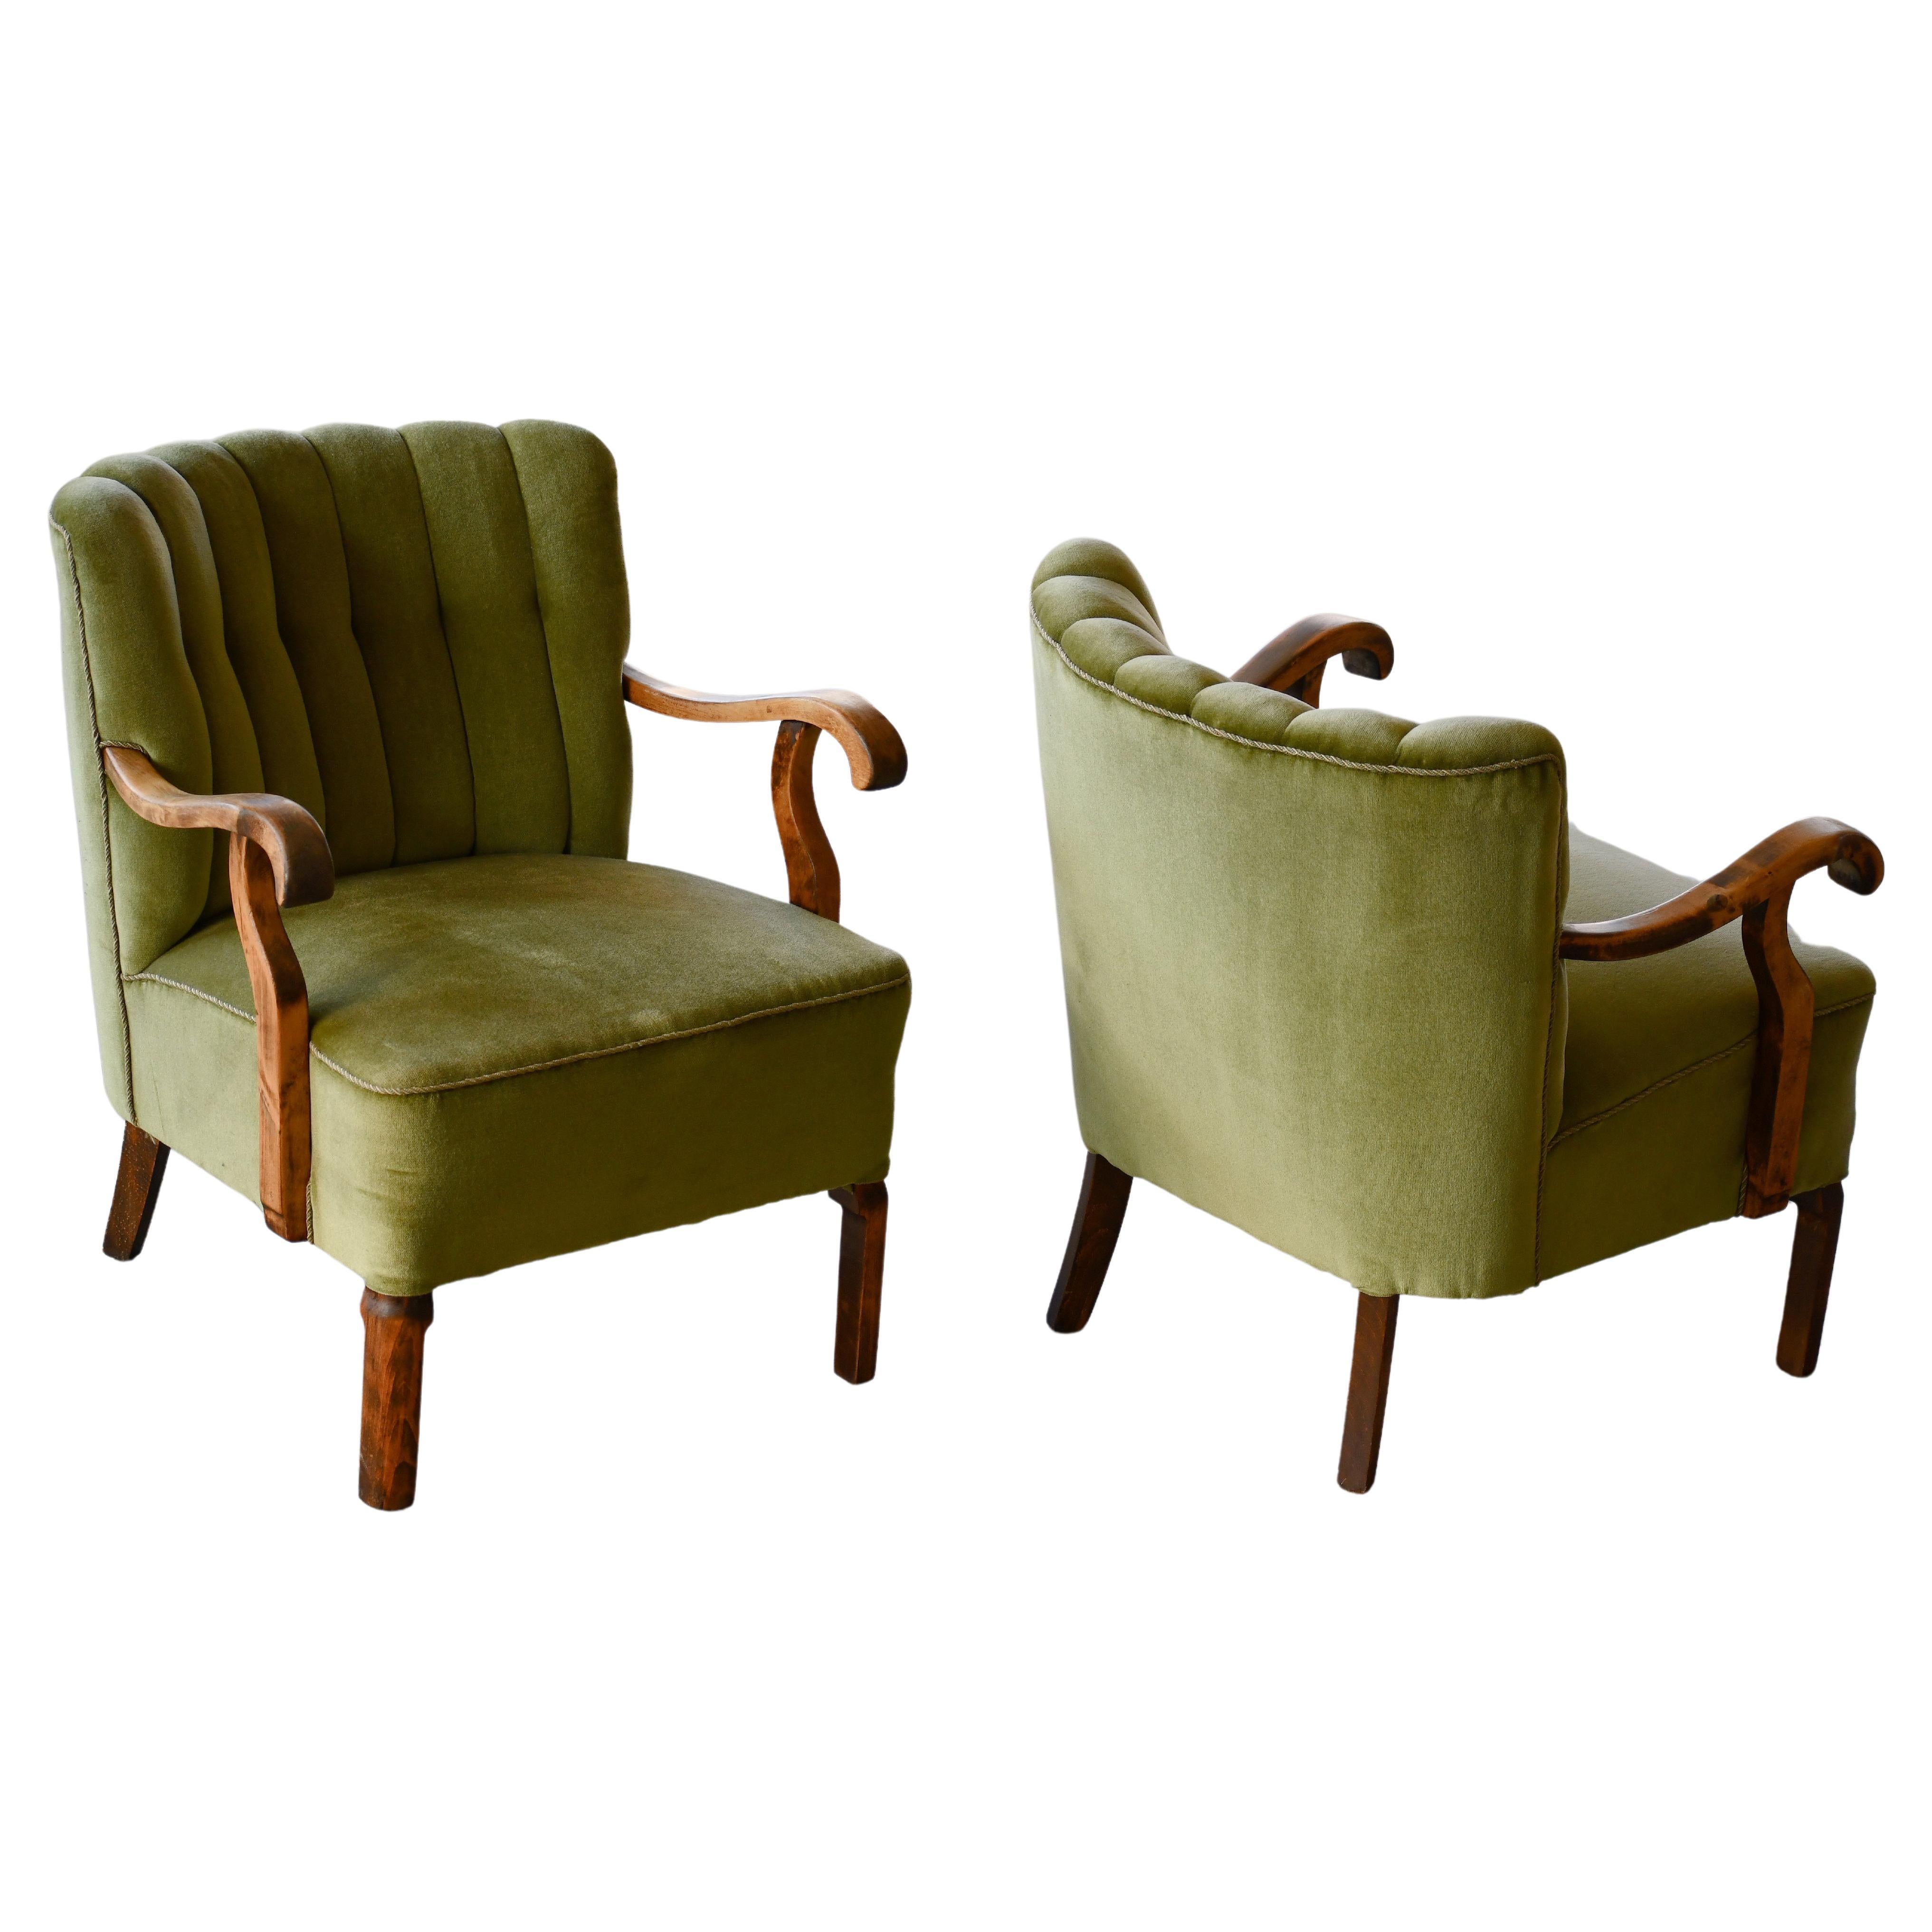 Pair of Danish 1940s Channel Back Low Easy Chairs with Open Armrests by Slagelse For Sale